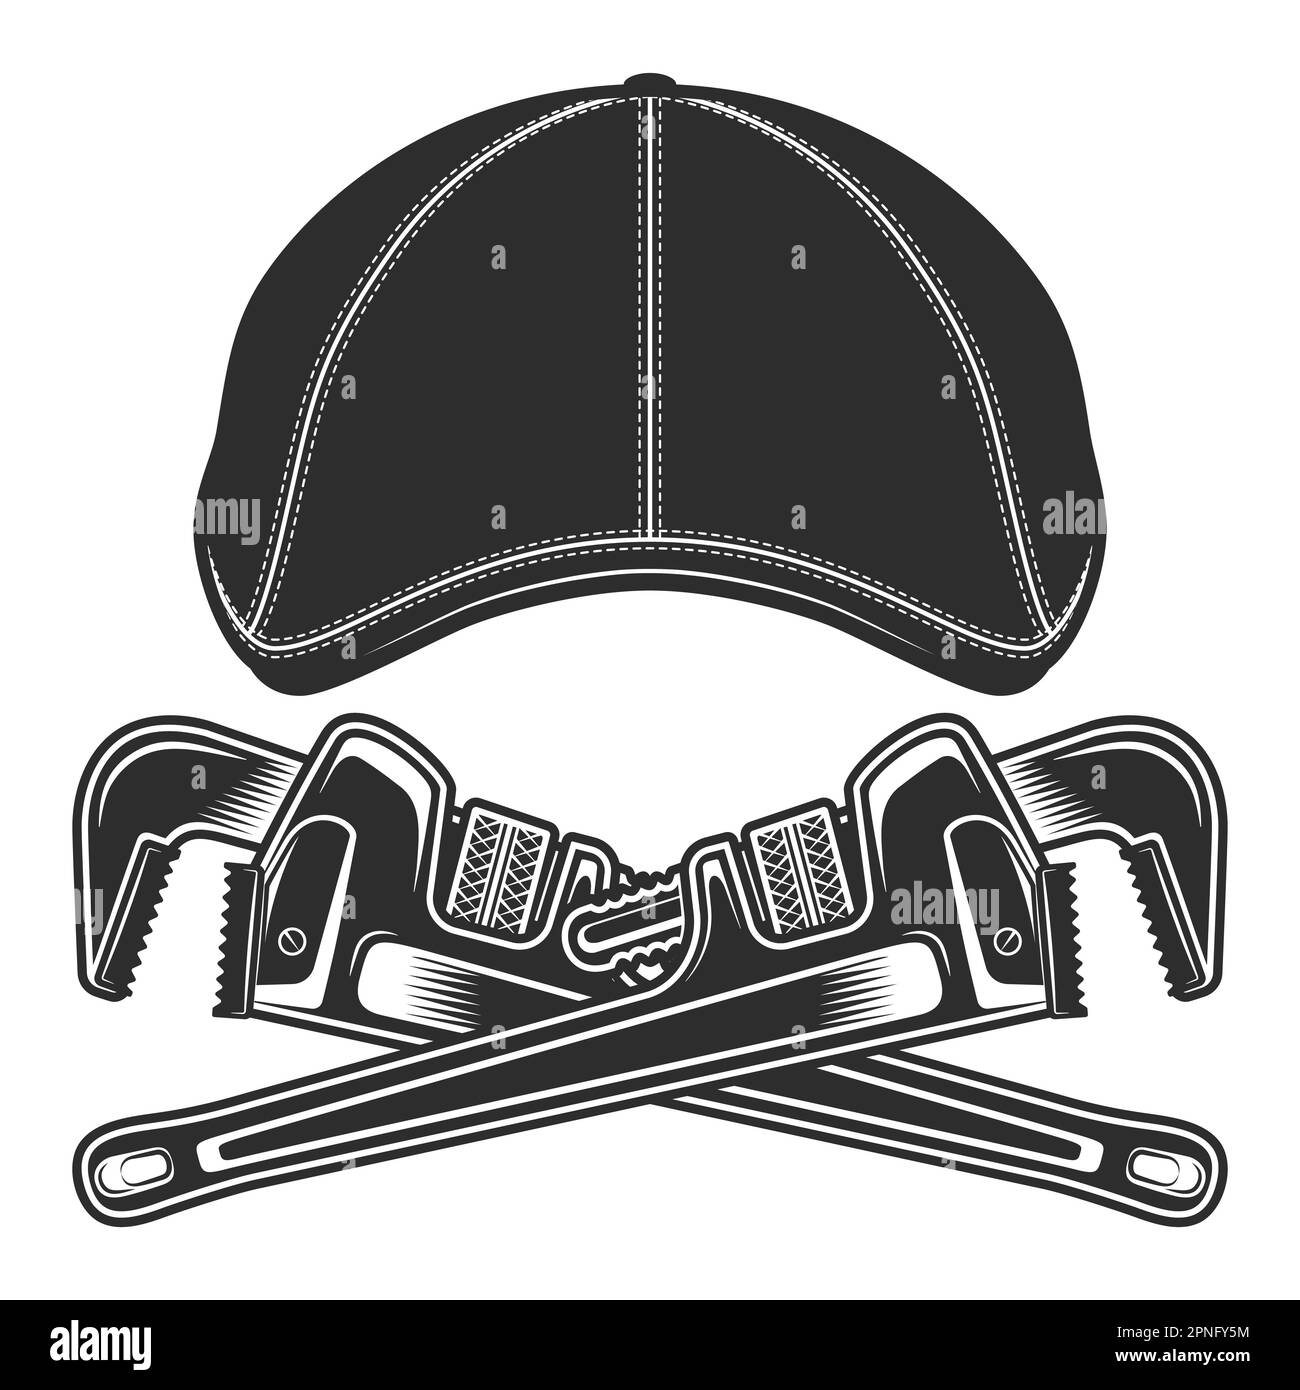 Flat cap gatsby tweed hat with constriction servise repair plumbing adjustable wrench vector vintage illustration Stock Vector